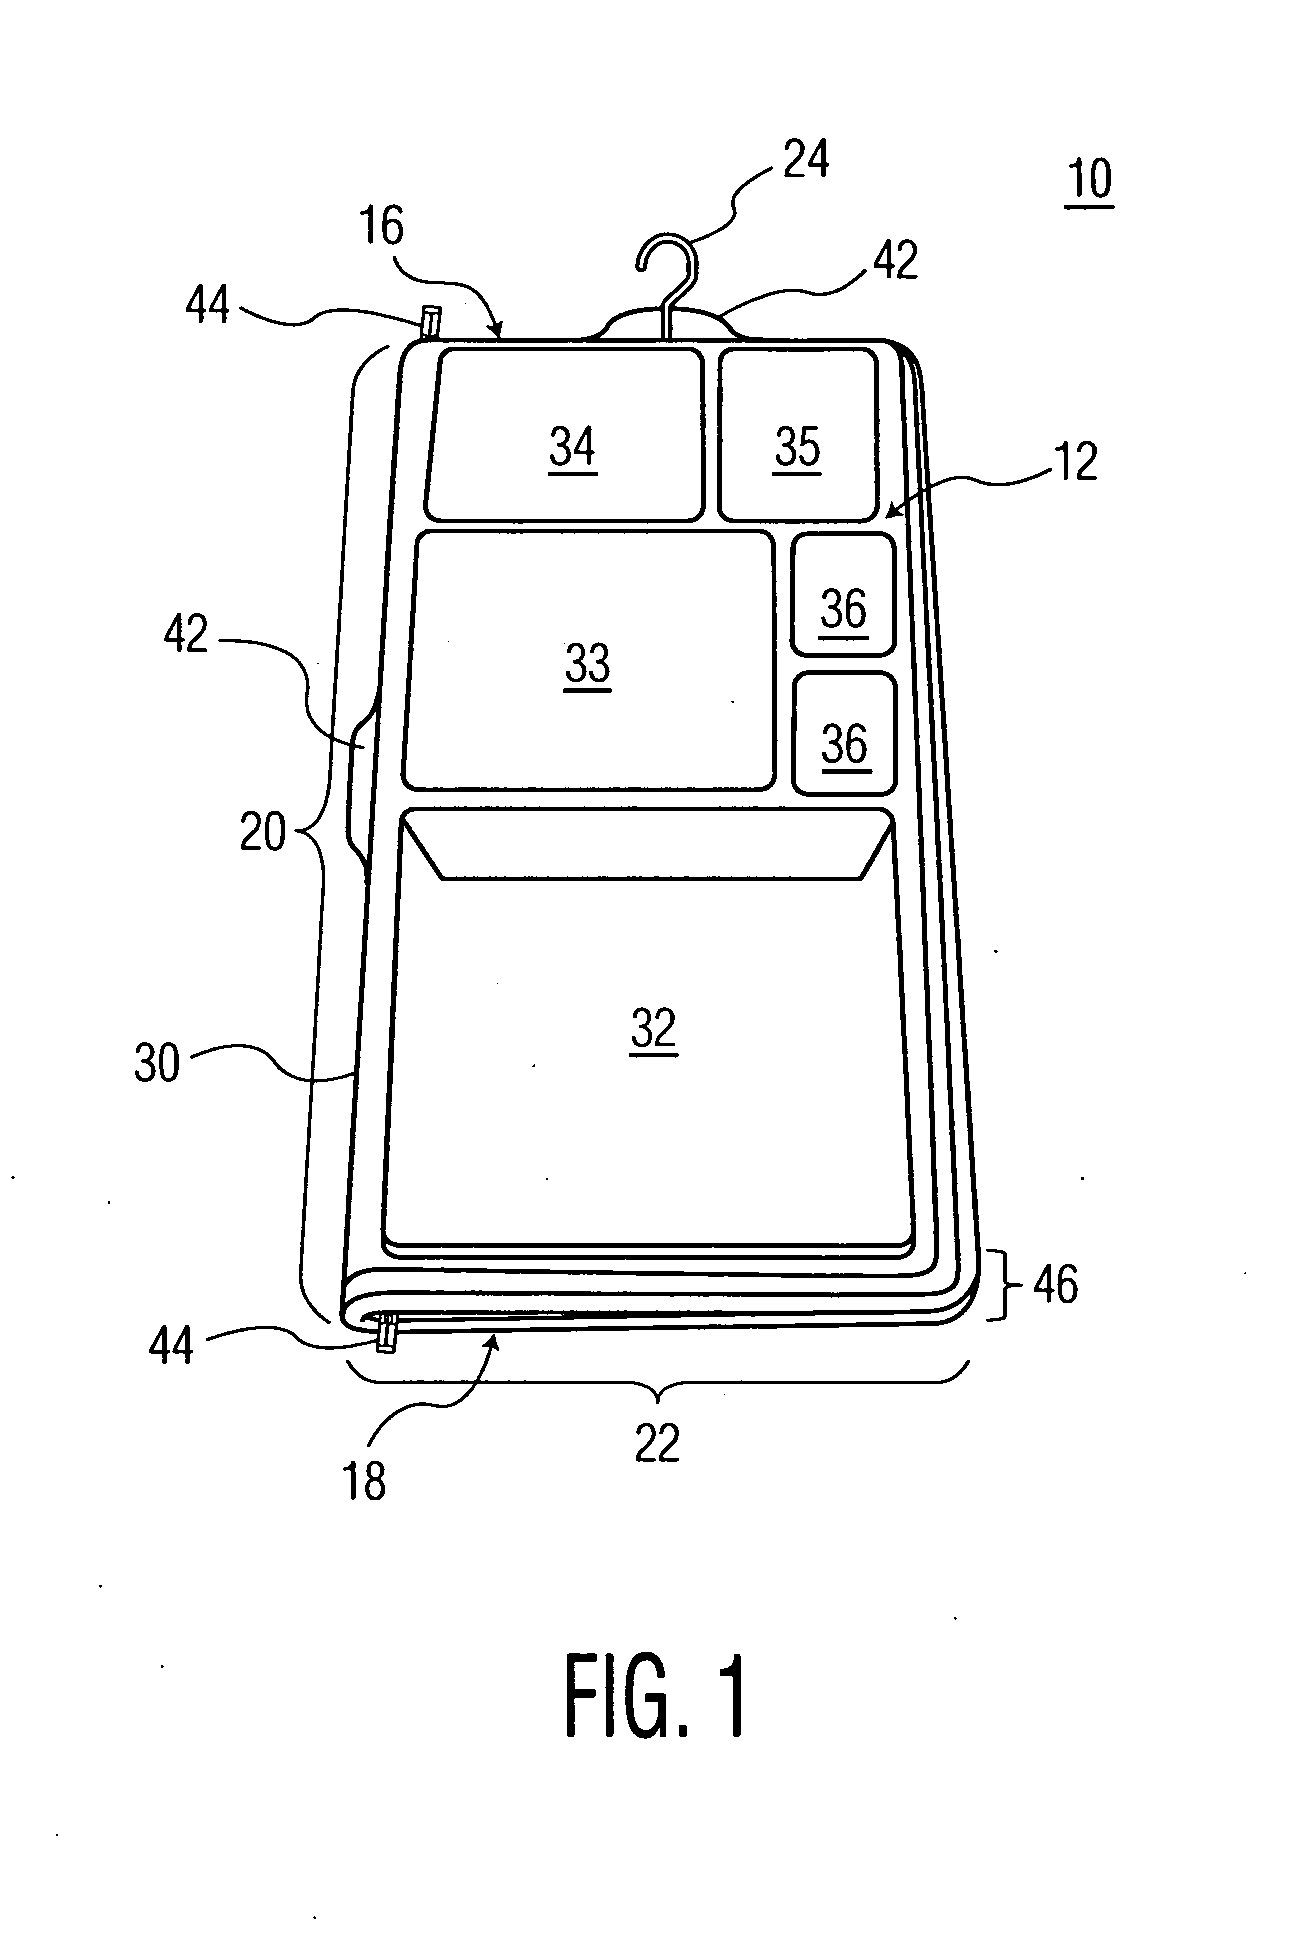 Storage device and system for gift wrapping